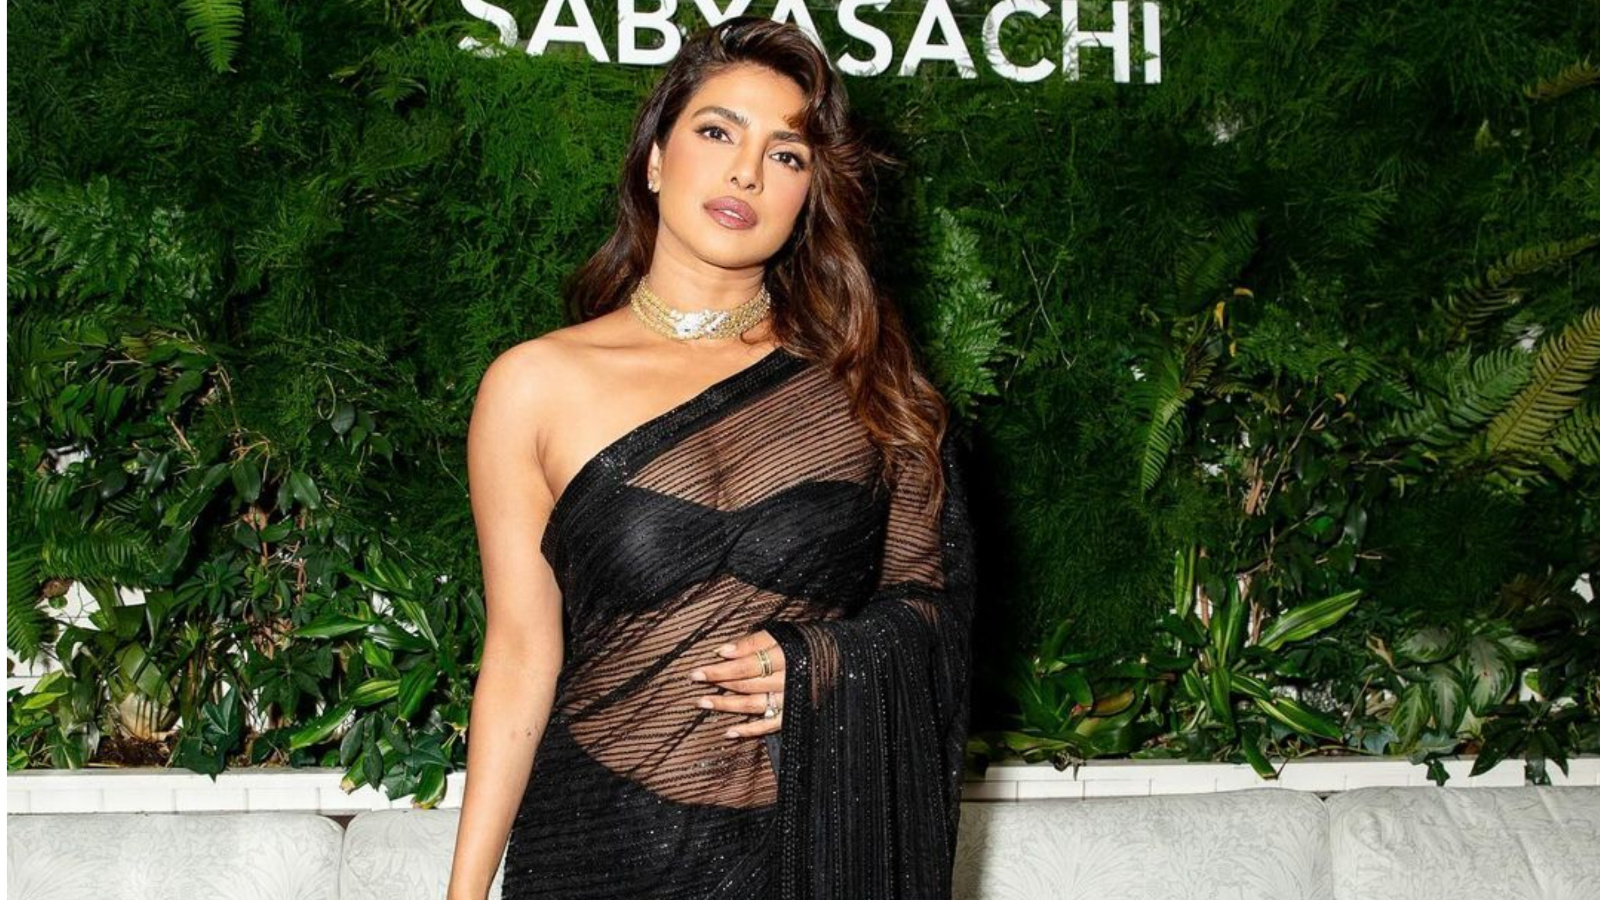 What are some jaw-dropping images of Priyanka Chopra in a saree? - Quora